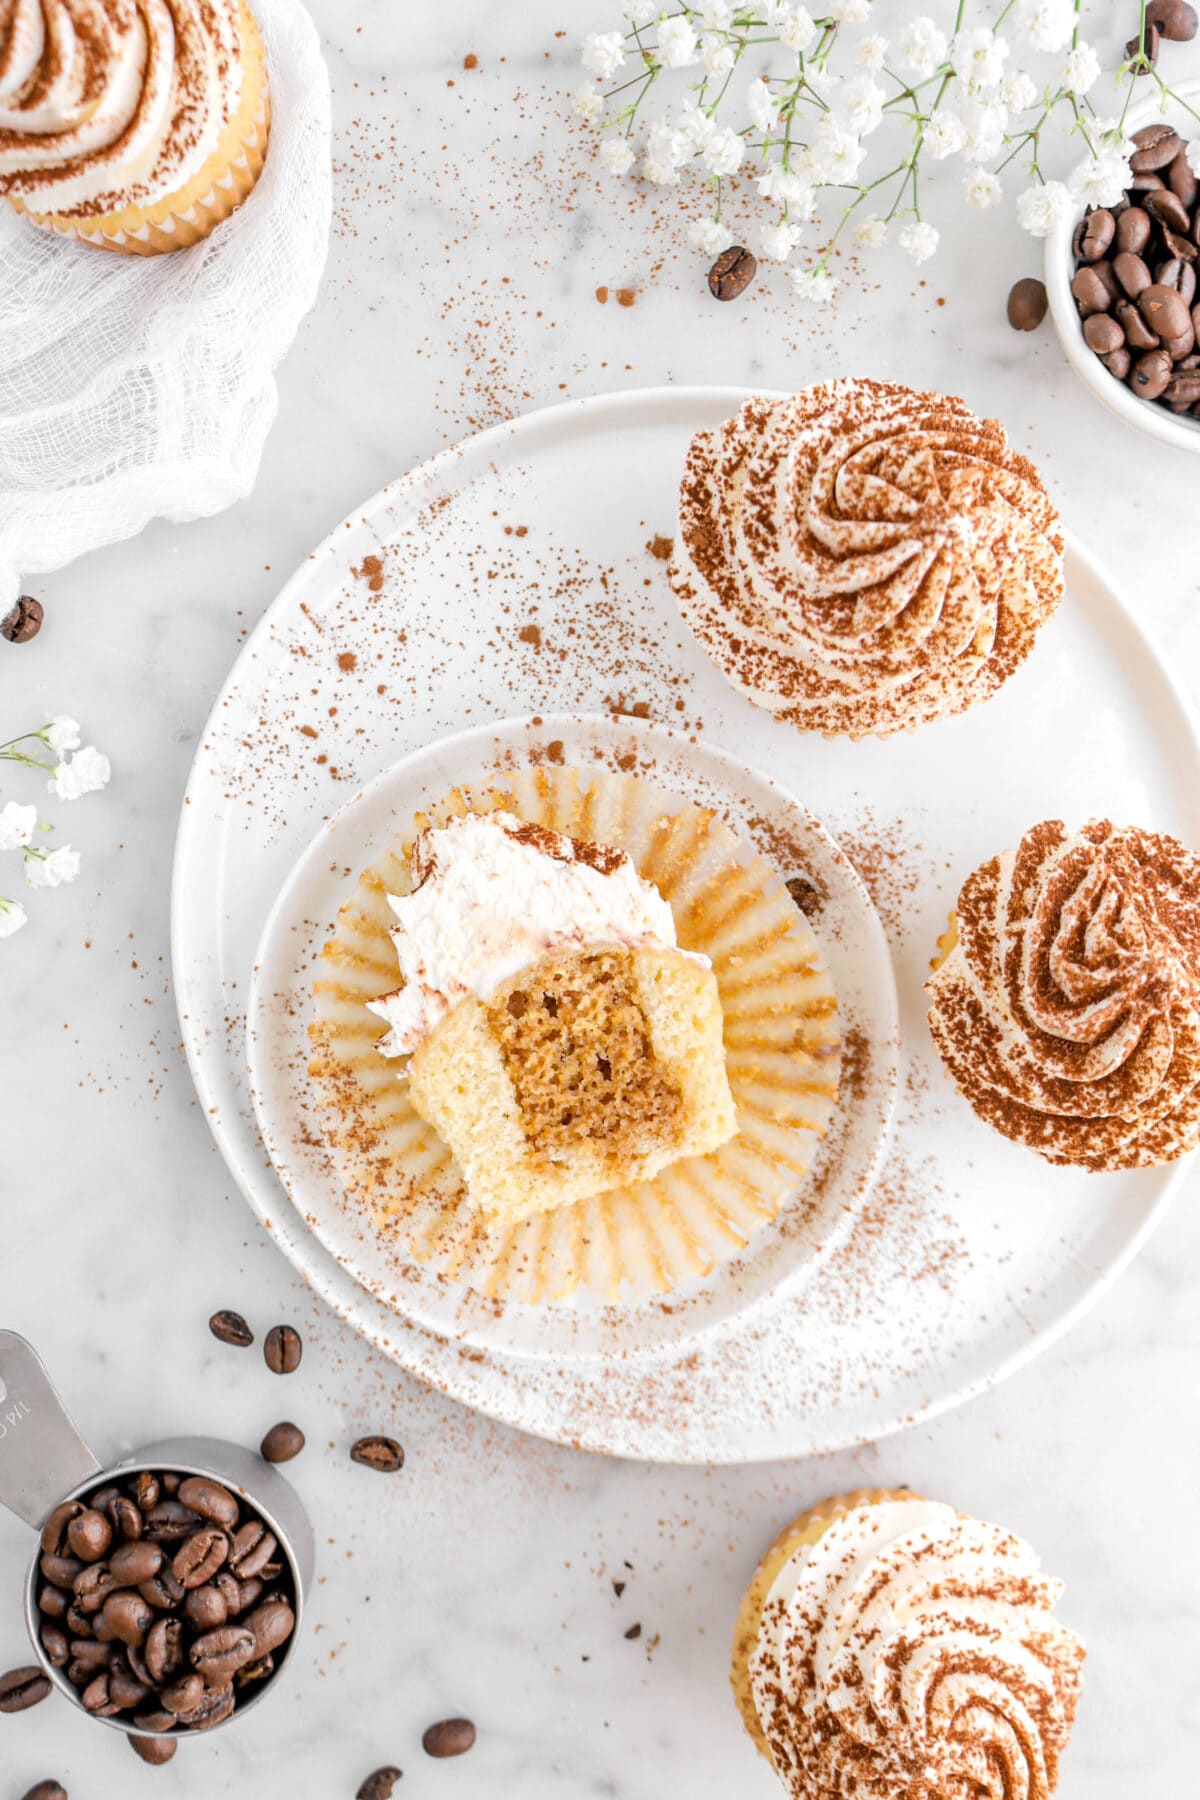 overhead shot of cupcake sliced in half on cupcake paper, with two white plates underneath, cocoa powder, coffee beans, and more cucakes around